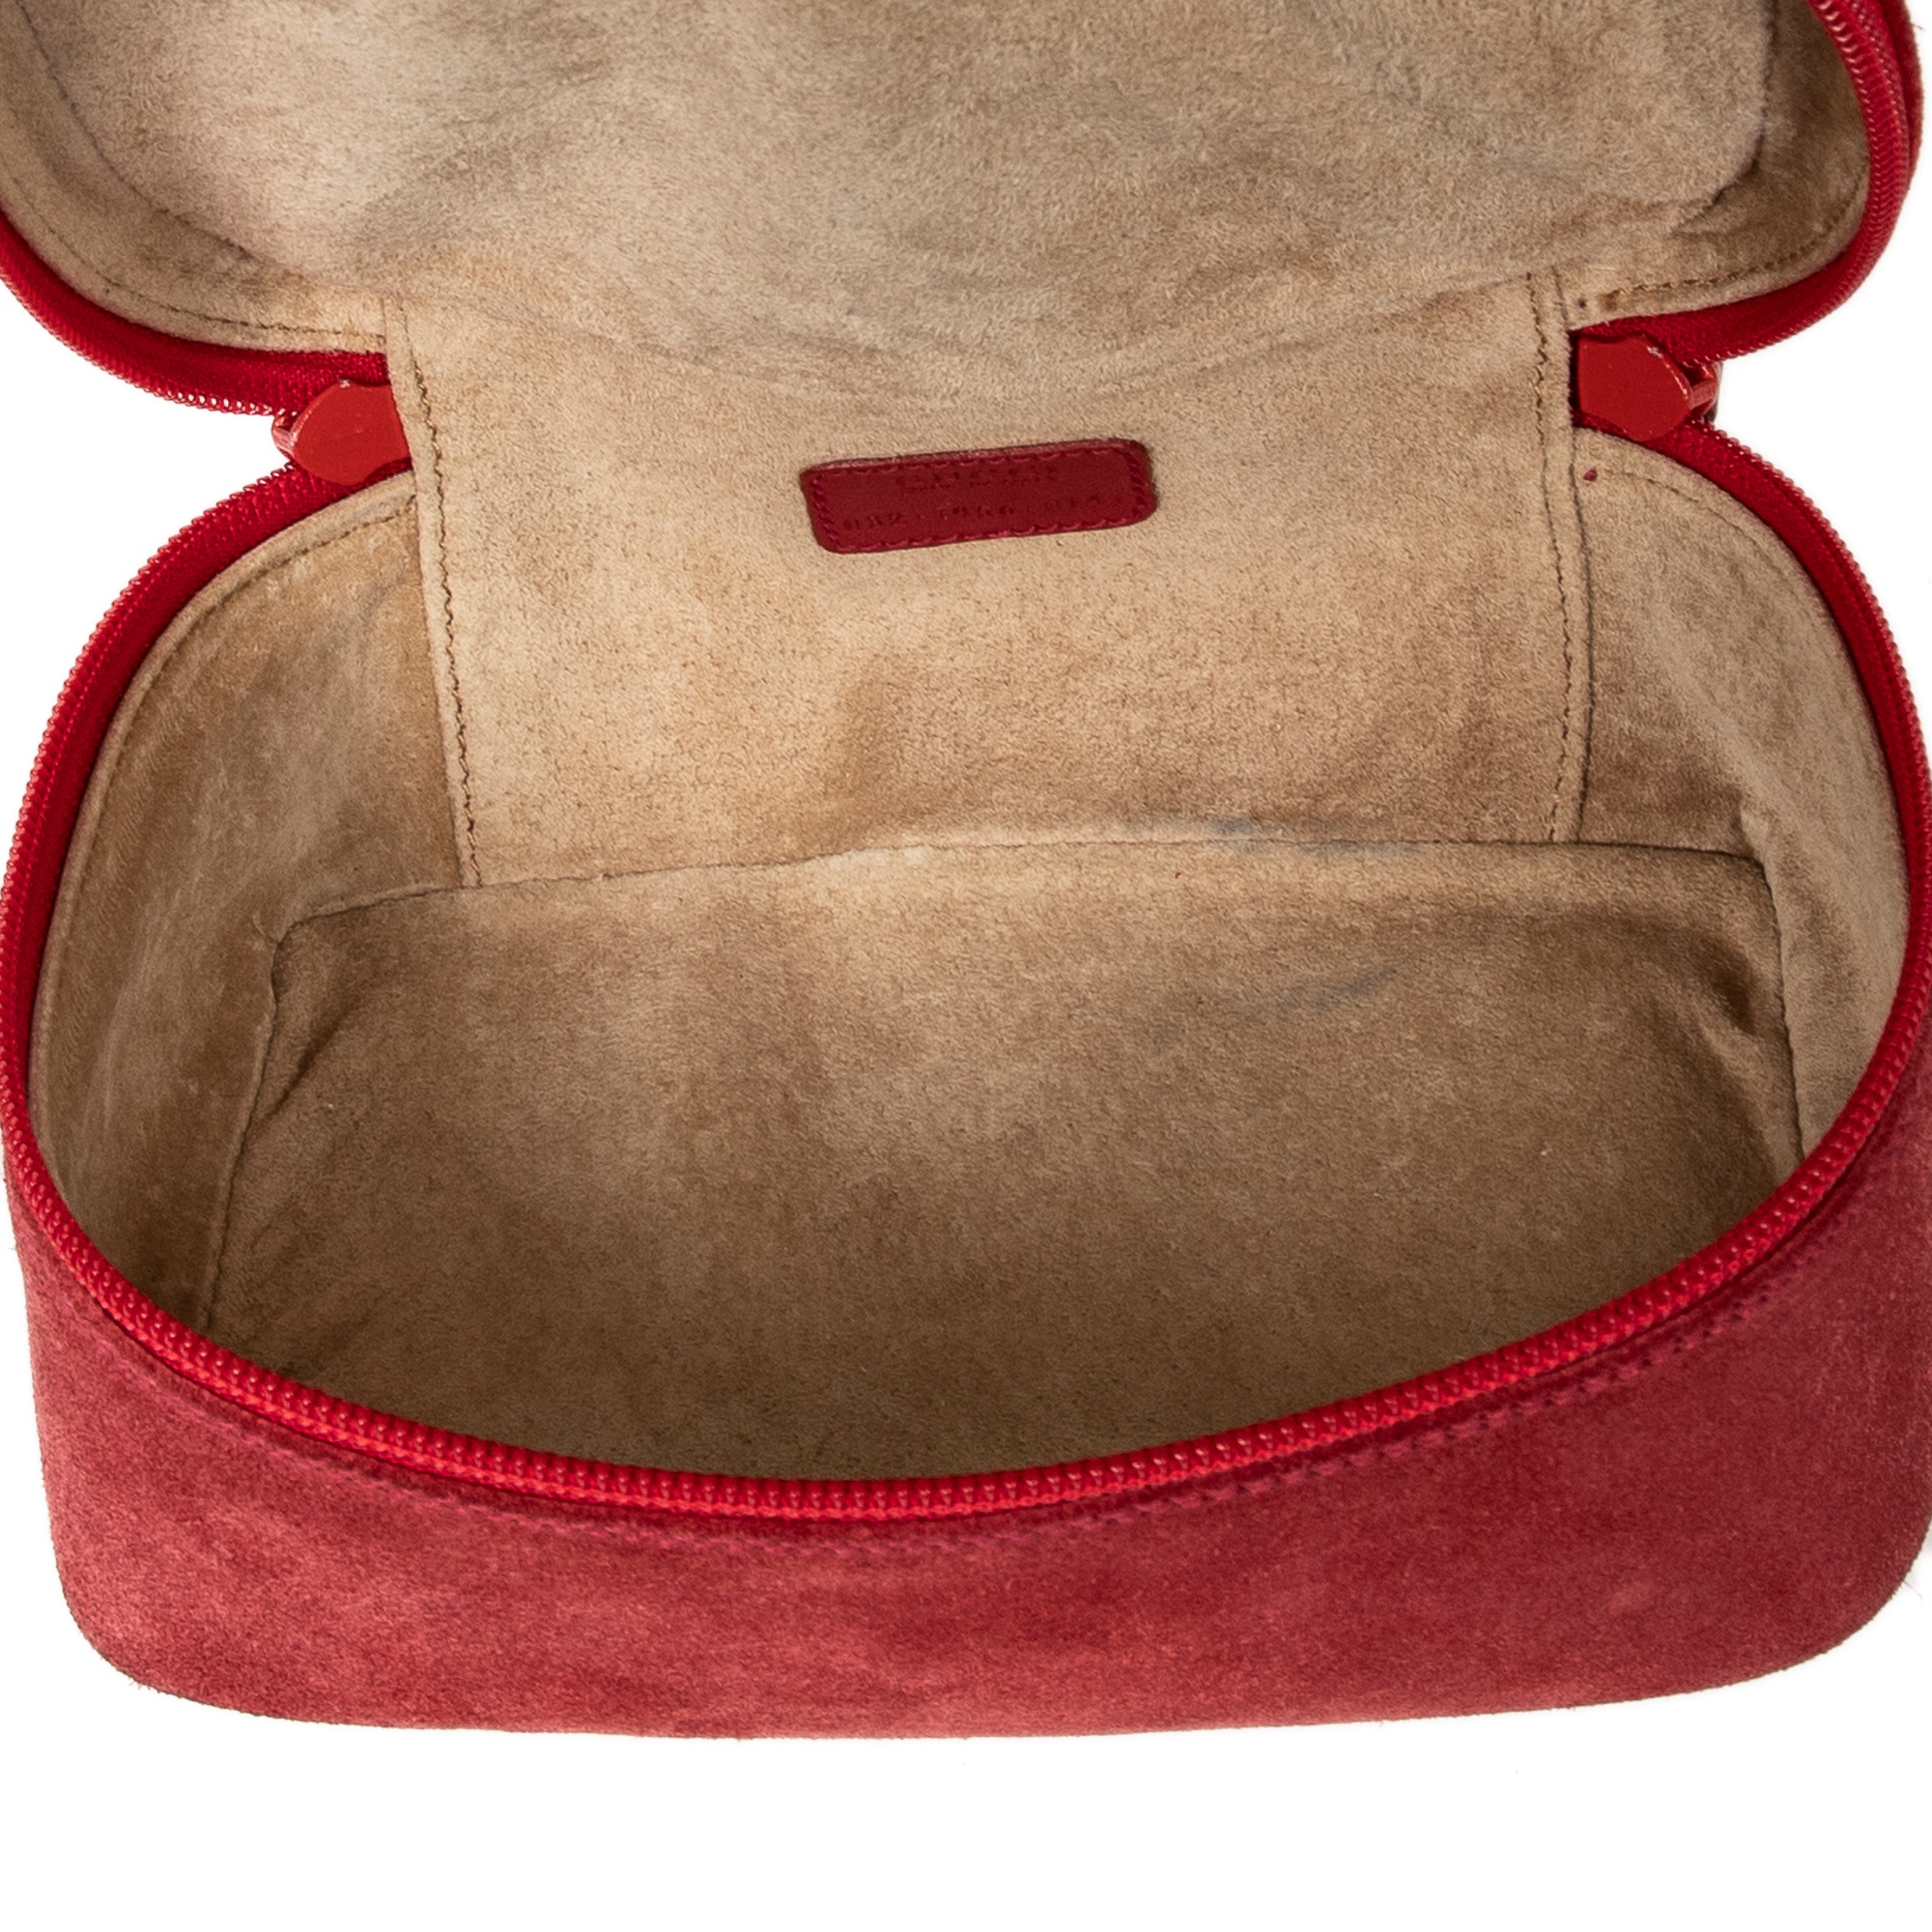 Gucci Red Suede Horsebit Cosmetic Case - Image 6 of 7